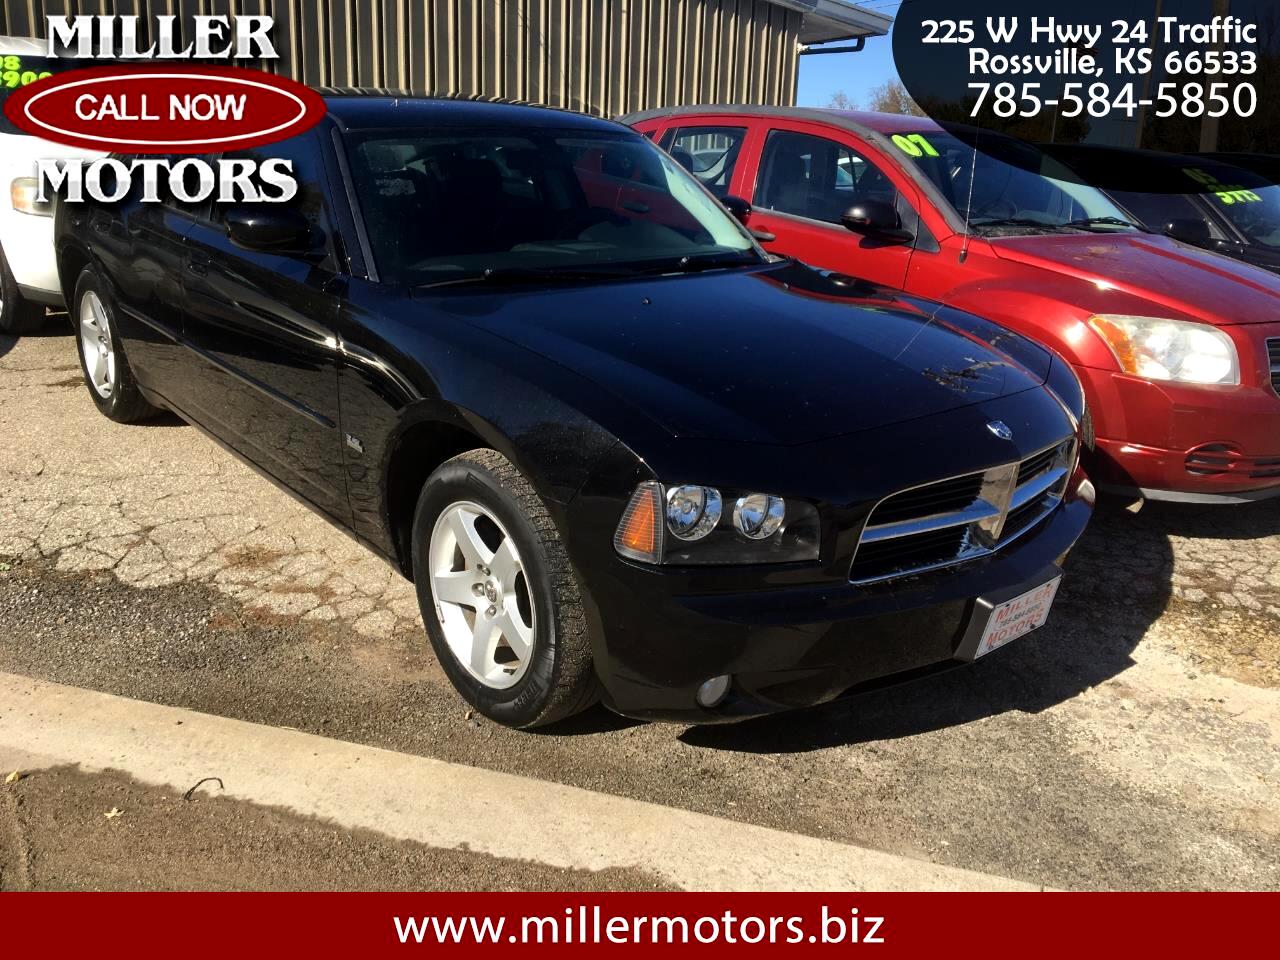 Used 2010 Dodge Charger 4dr Sdn Sxt Rwd For Sale In